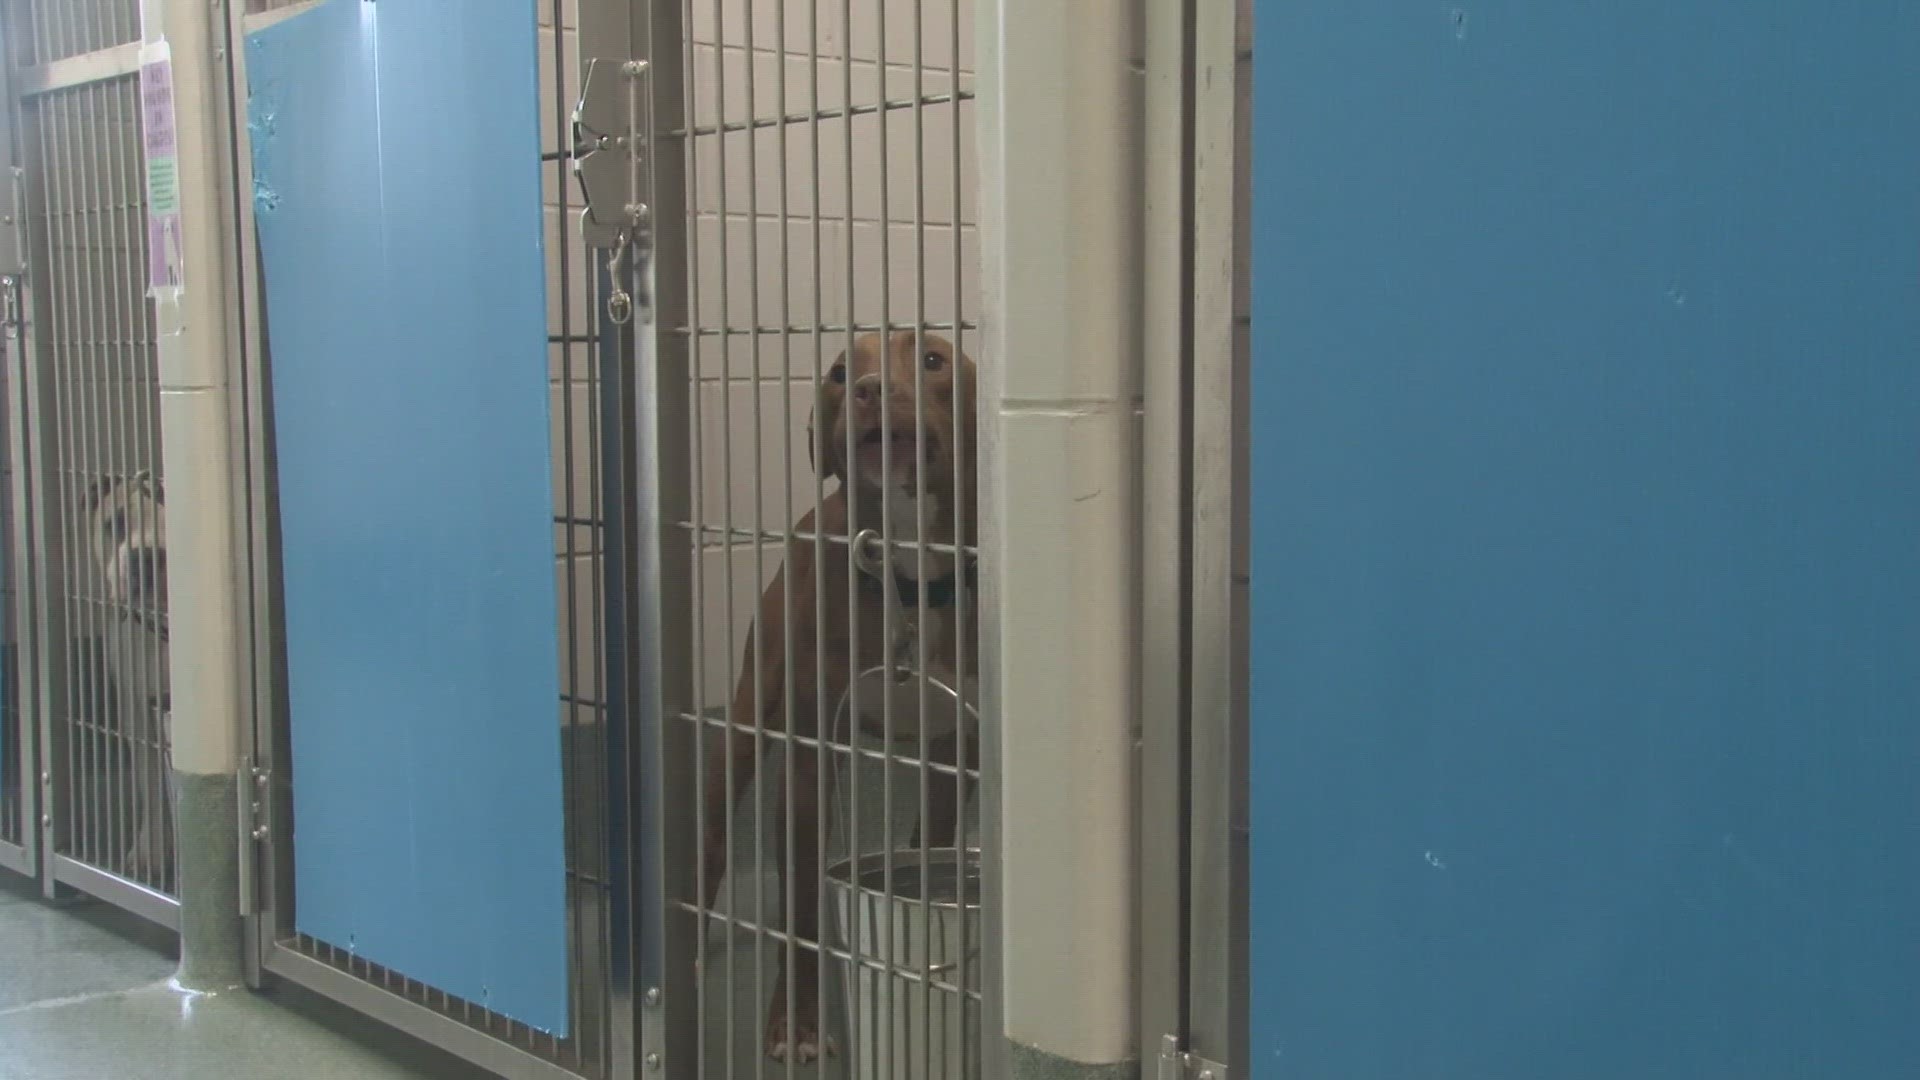 The shelter is waiving adoption fees to try to make room.